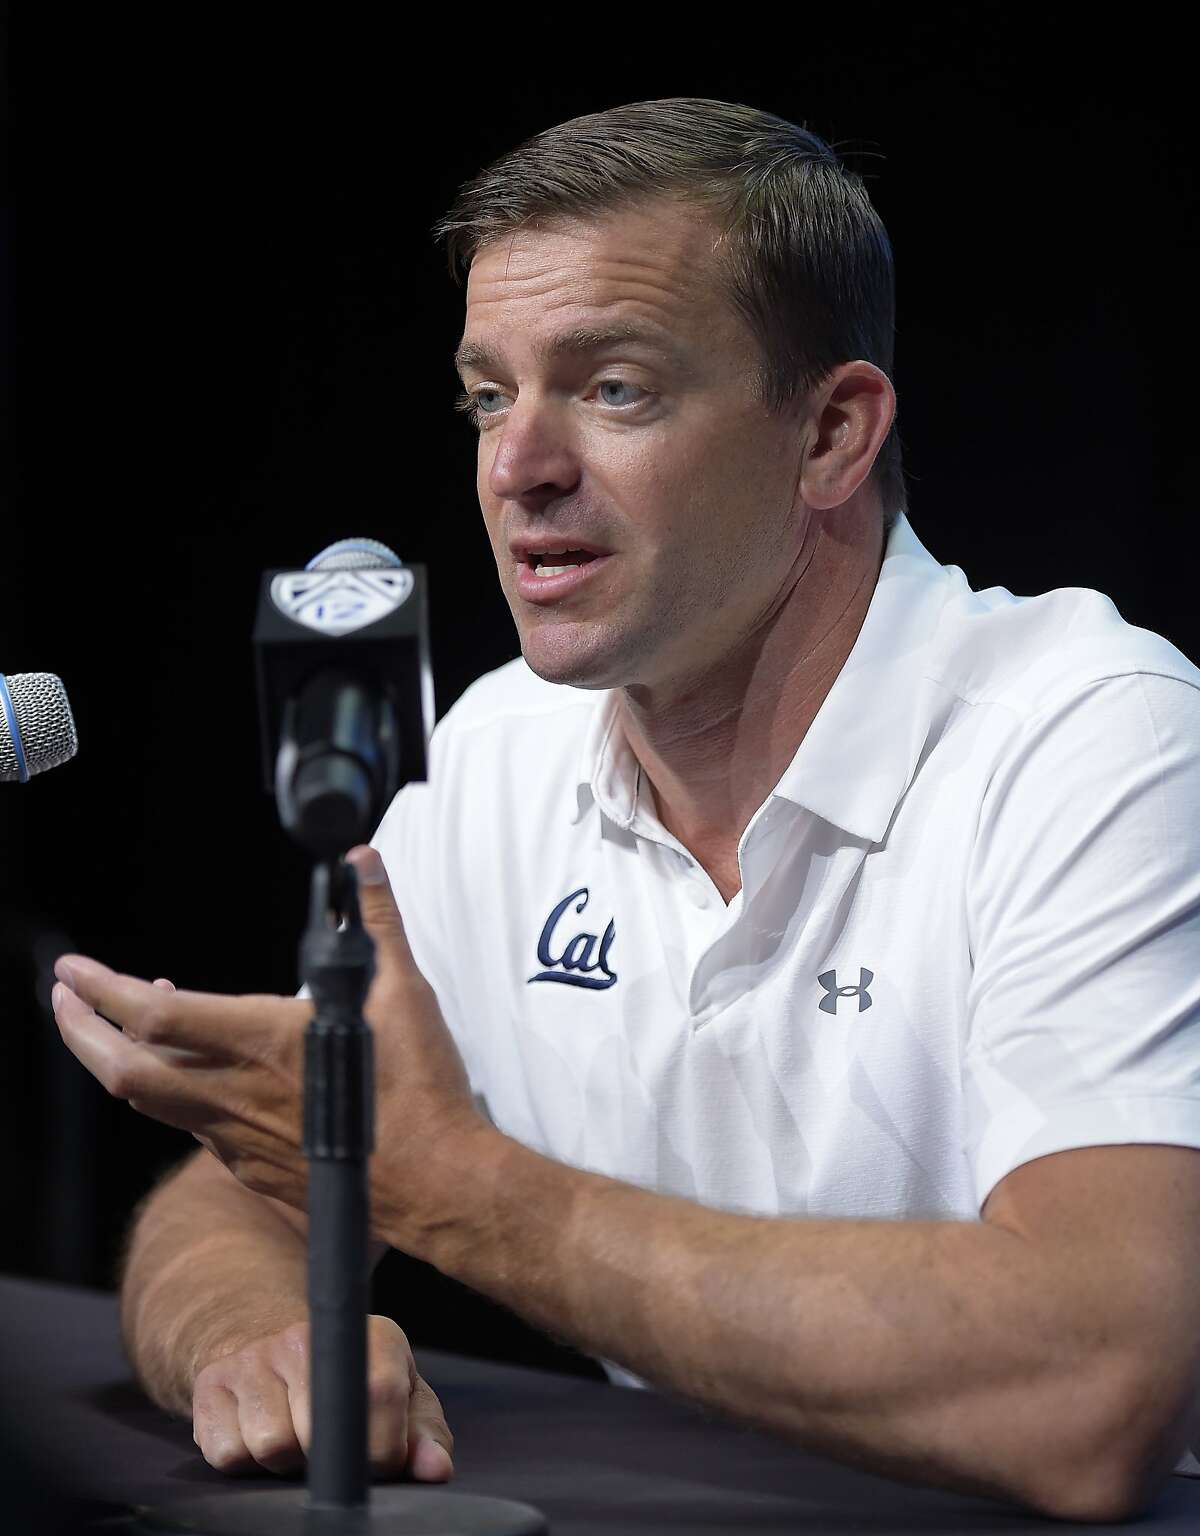 Cal head coach Justin Wilcox speaks at Pac-12 NCAA college football Media Day, Wednesday, July 26, 2017, in the Hollywood section of Los Angeles. (AP Photo/Mark J. Terrill)